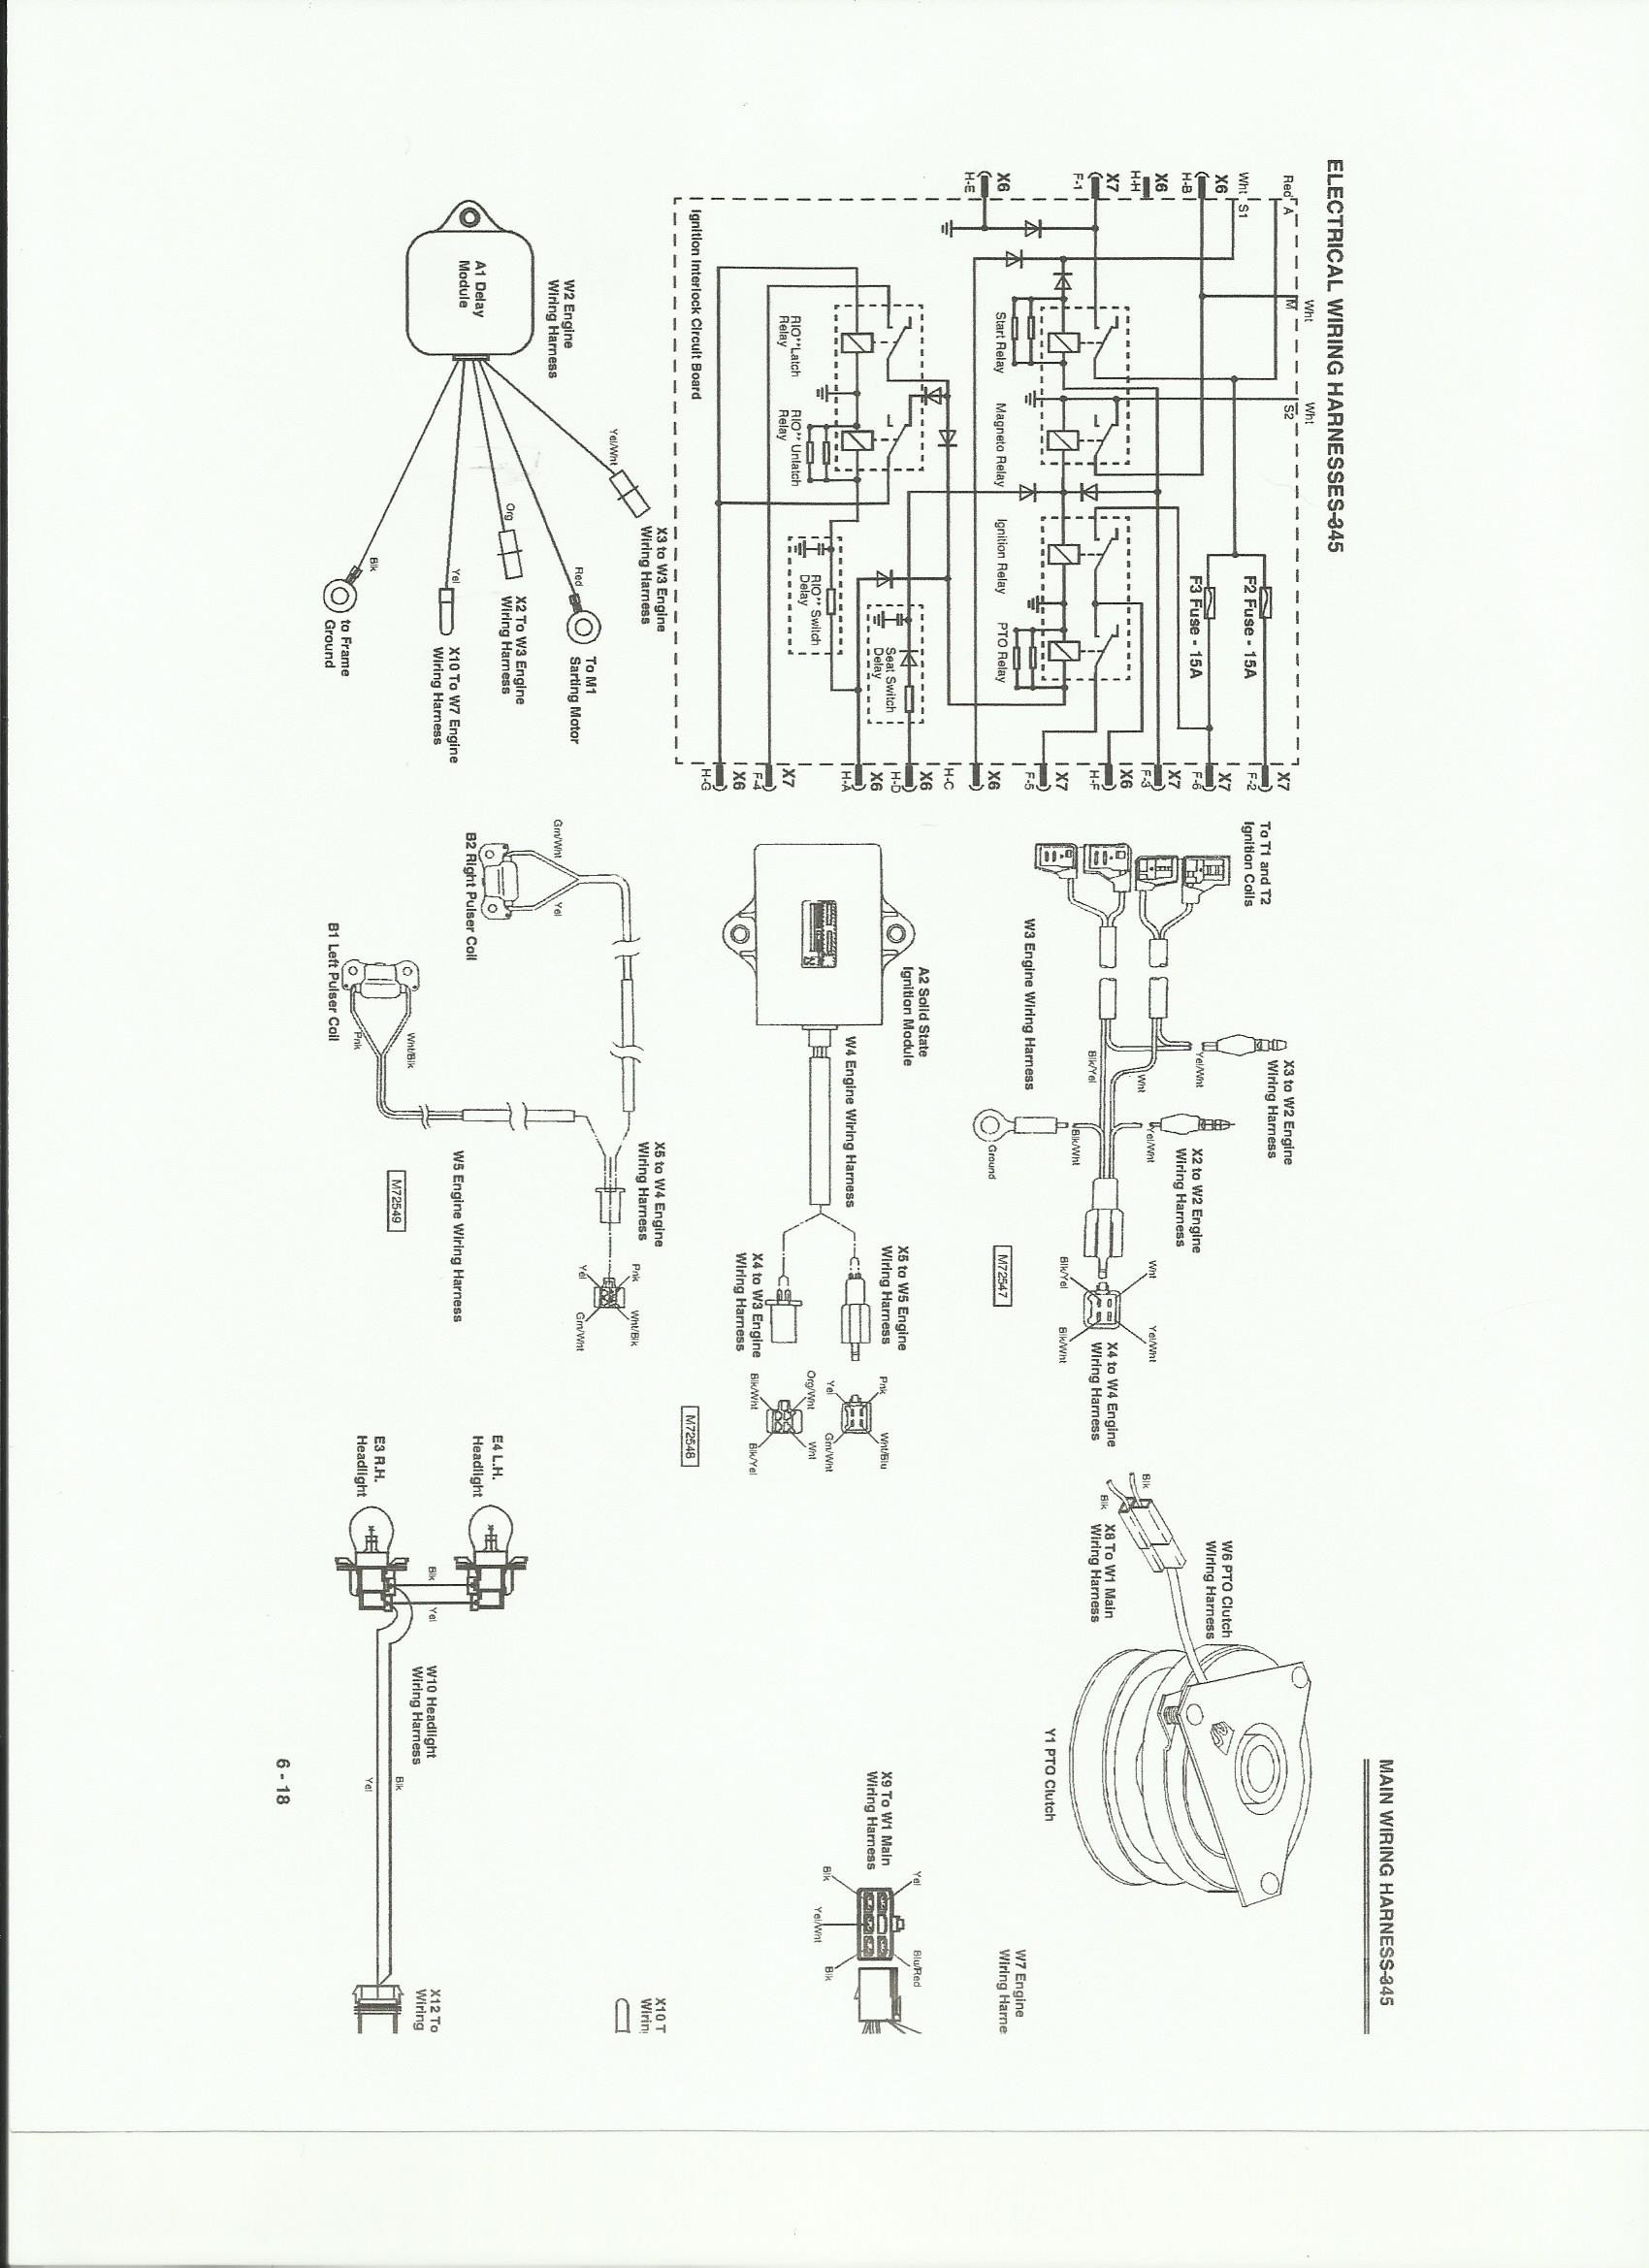 Wiring Diagram for A 345 John Deere Tractor Need A 345 Wiring Diagram Pdf Please Mytractorforum the Friendliest Tractor forum and Of Wiring Diagram for A 345 John Deere Tractor